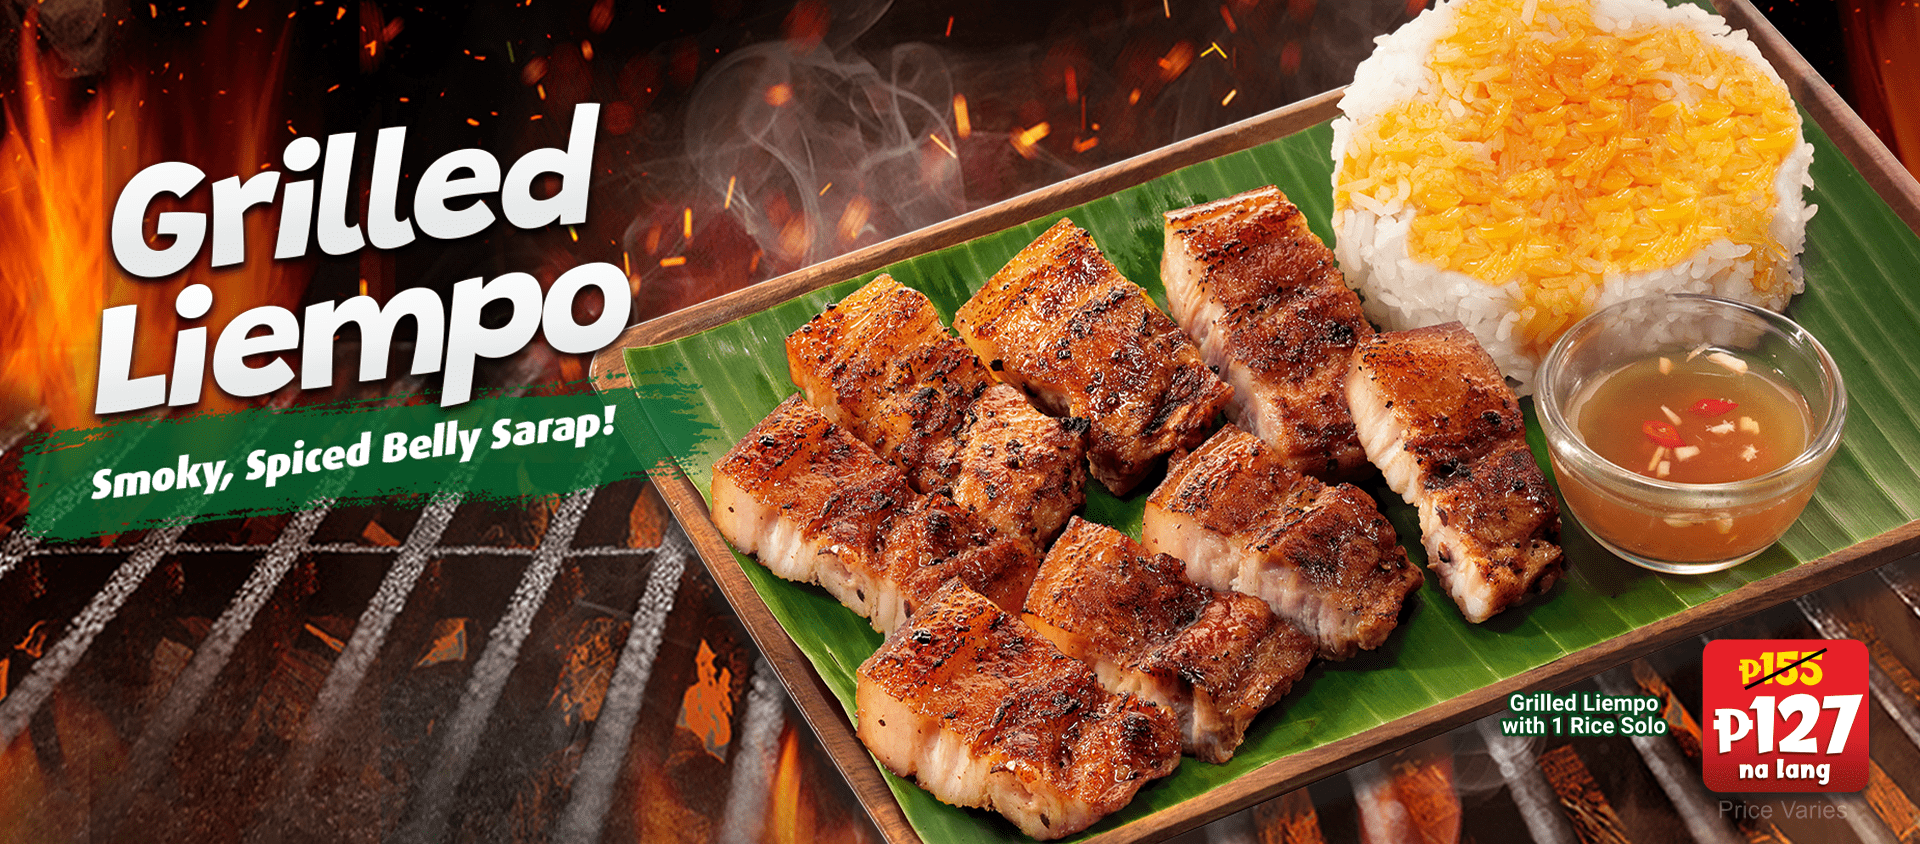 Mang Inasal lowers the price of Grilled Liempo in select areas